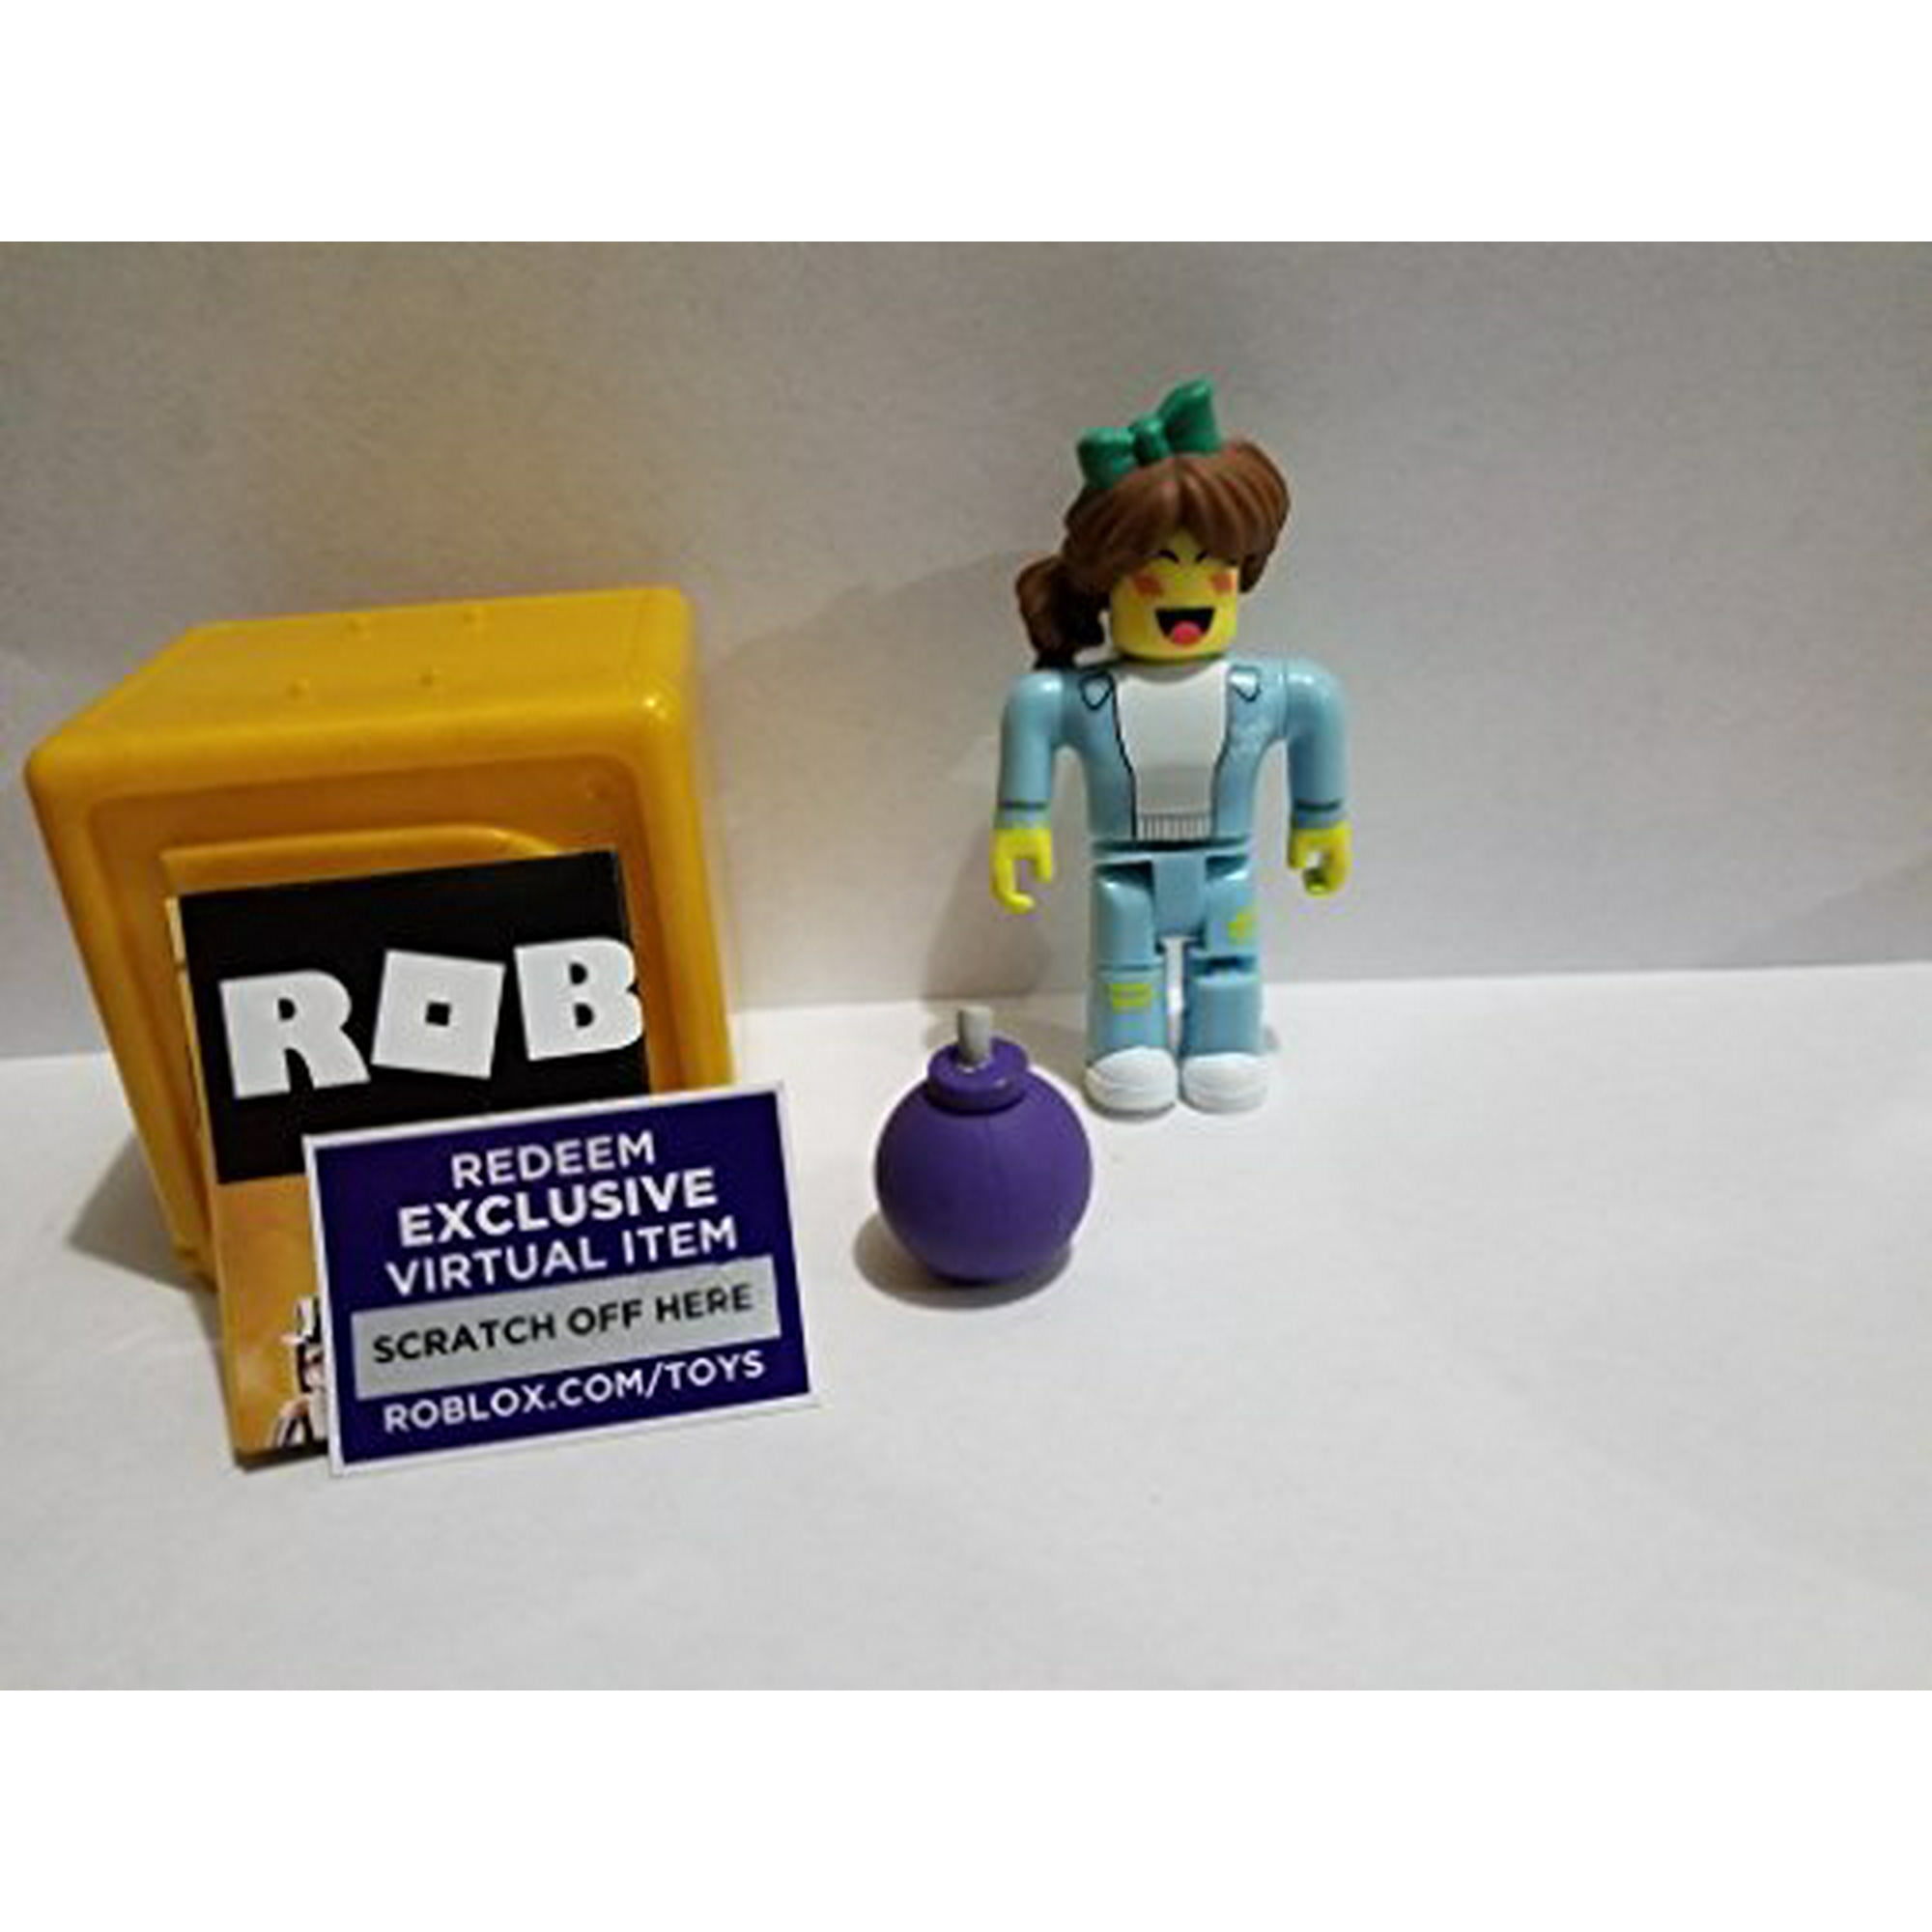 Roblox Gold Celebrity Series Super Bomb Survival Shopgirl Action Figure Mystery Box Virtual Item Code 2 5 Walmart Canada - fall 2019 sales are here get this deal on roblox celebrity